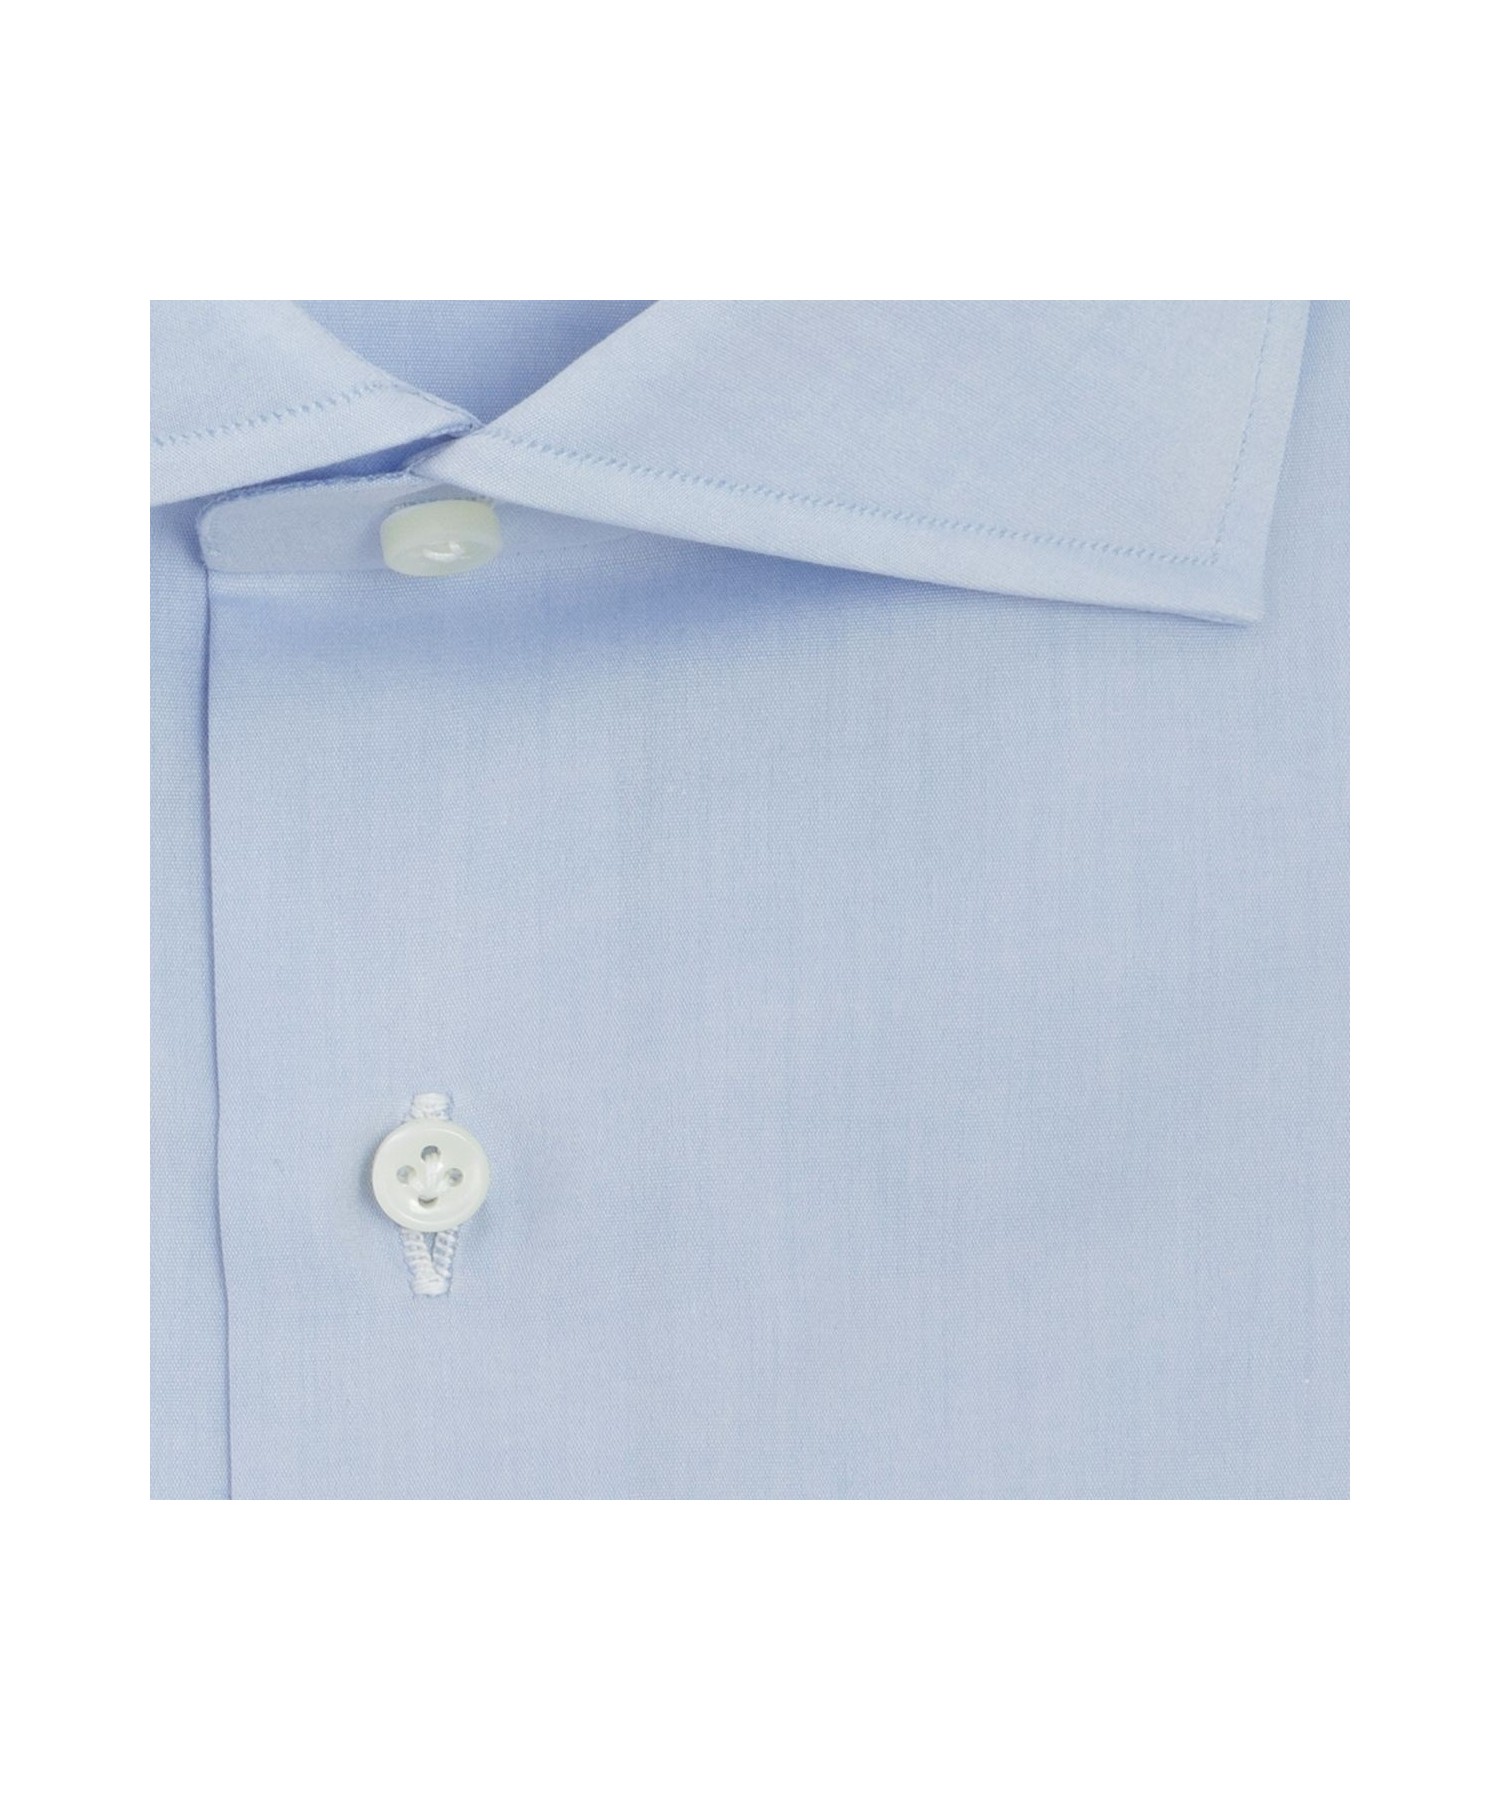 LIGHT BLUE POPLIN SHIRT - 8 PHASES MADE BY HAND